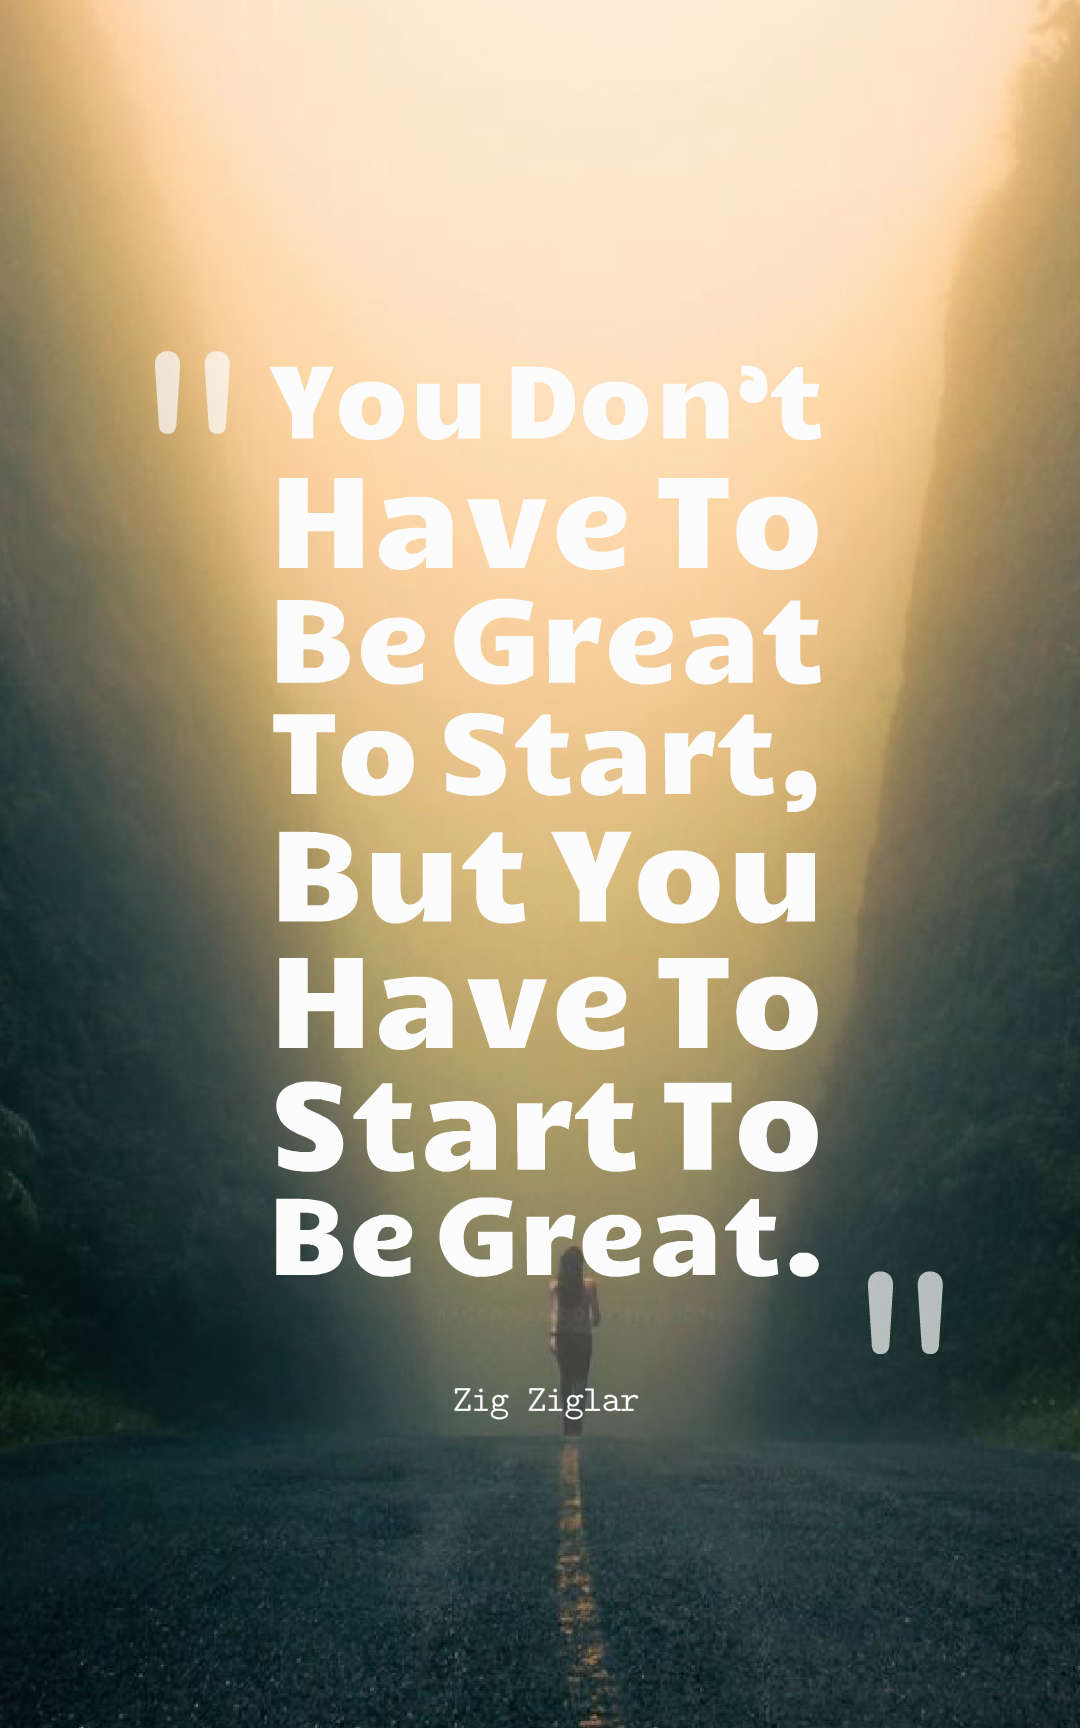 You Don’t Have To Be Great To Start, But You Have To Start To Be Great.